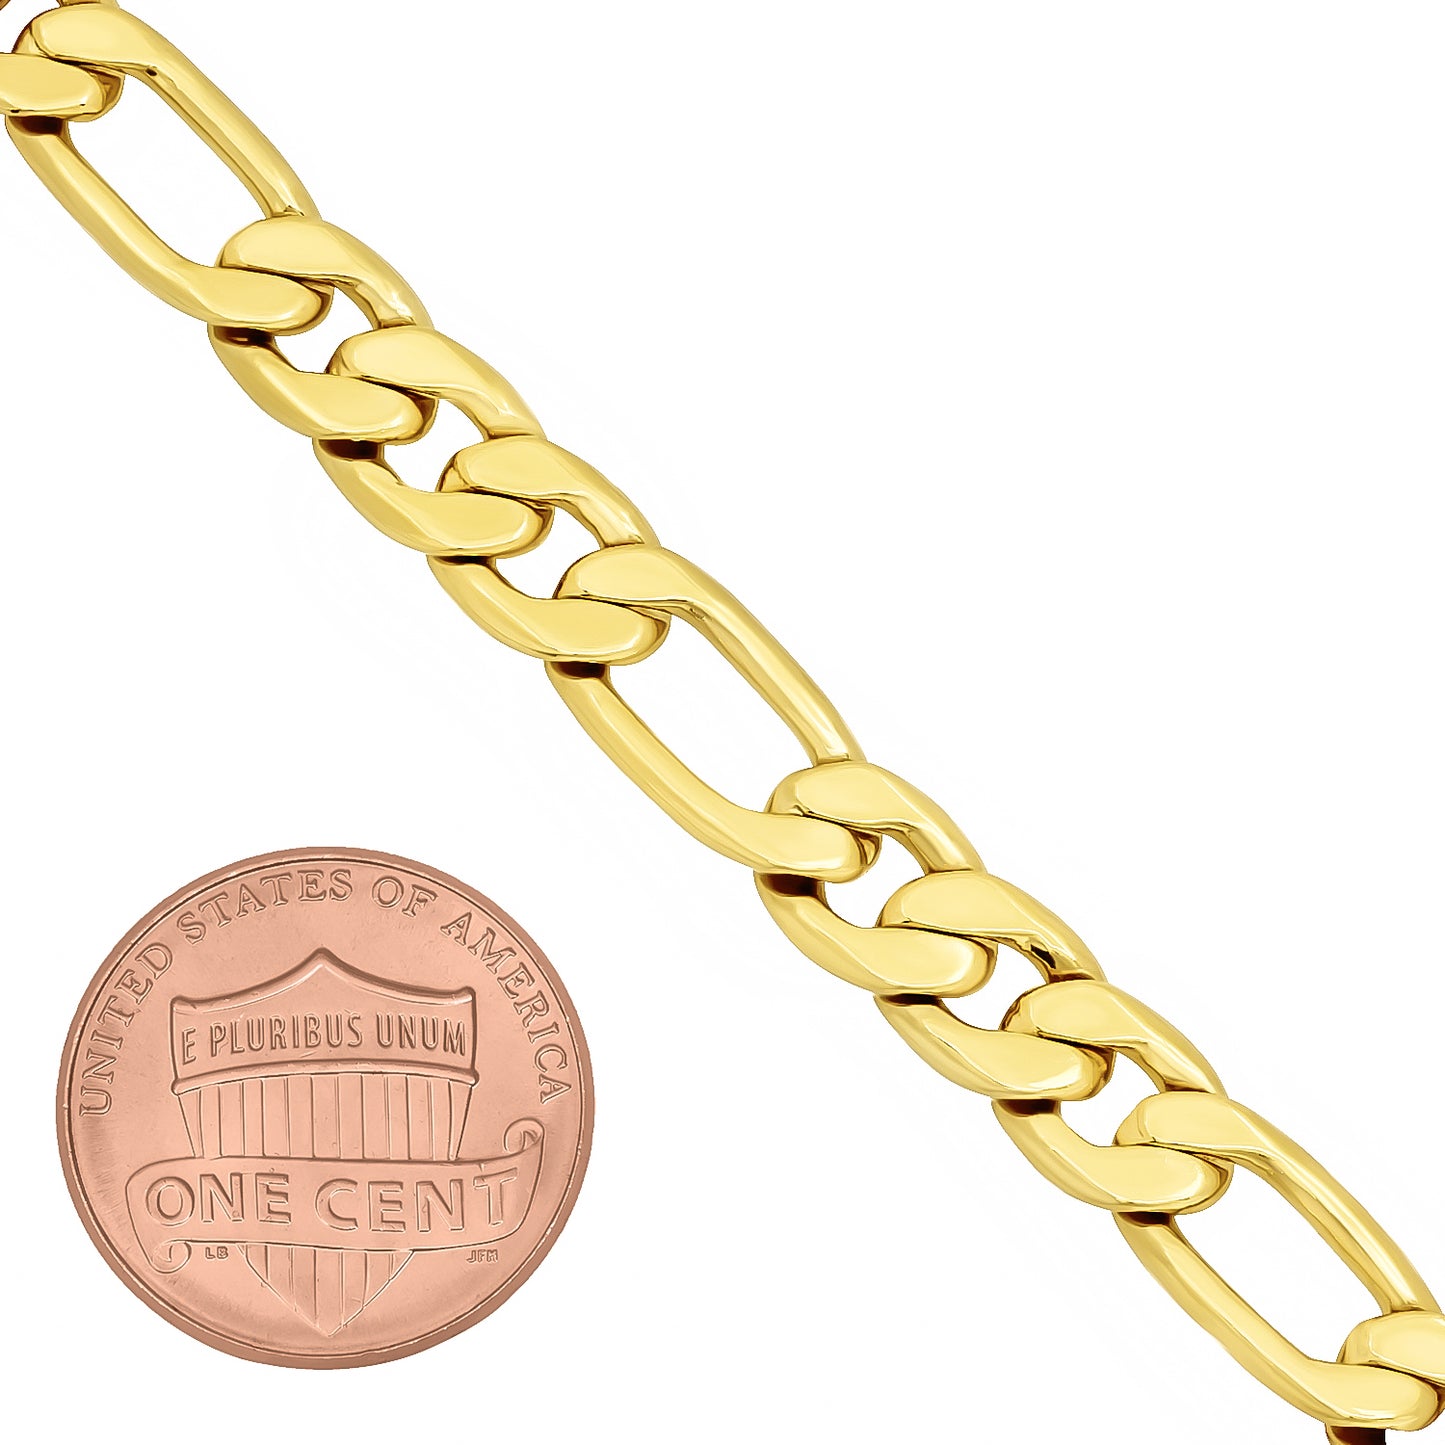 7mm 25 mills 14k Gold Plated Figaro Chain Necklace, 7'8'9'16'18'20'22'24'30" + Jewelry Cloth (SKU: GL-009B)